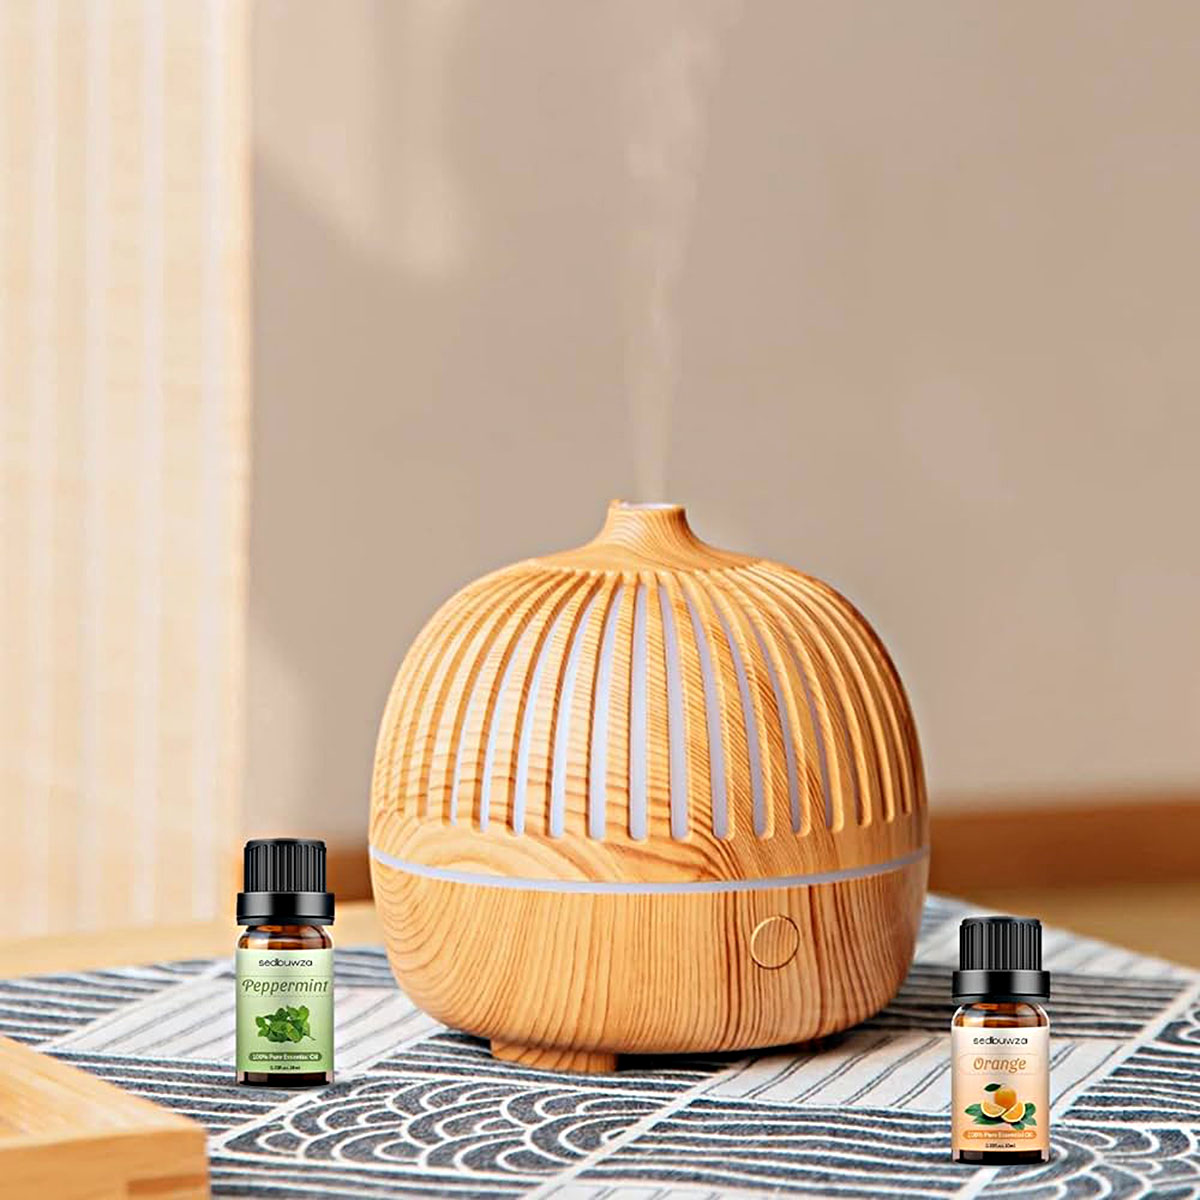 What Is Peppermint Oil Good For In A Diffuser?